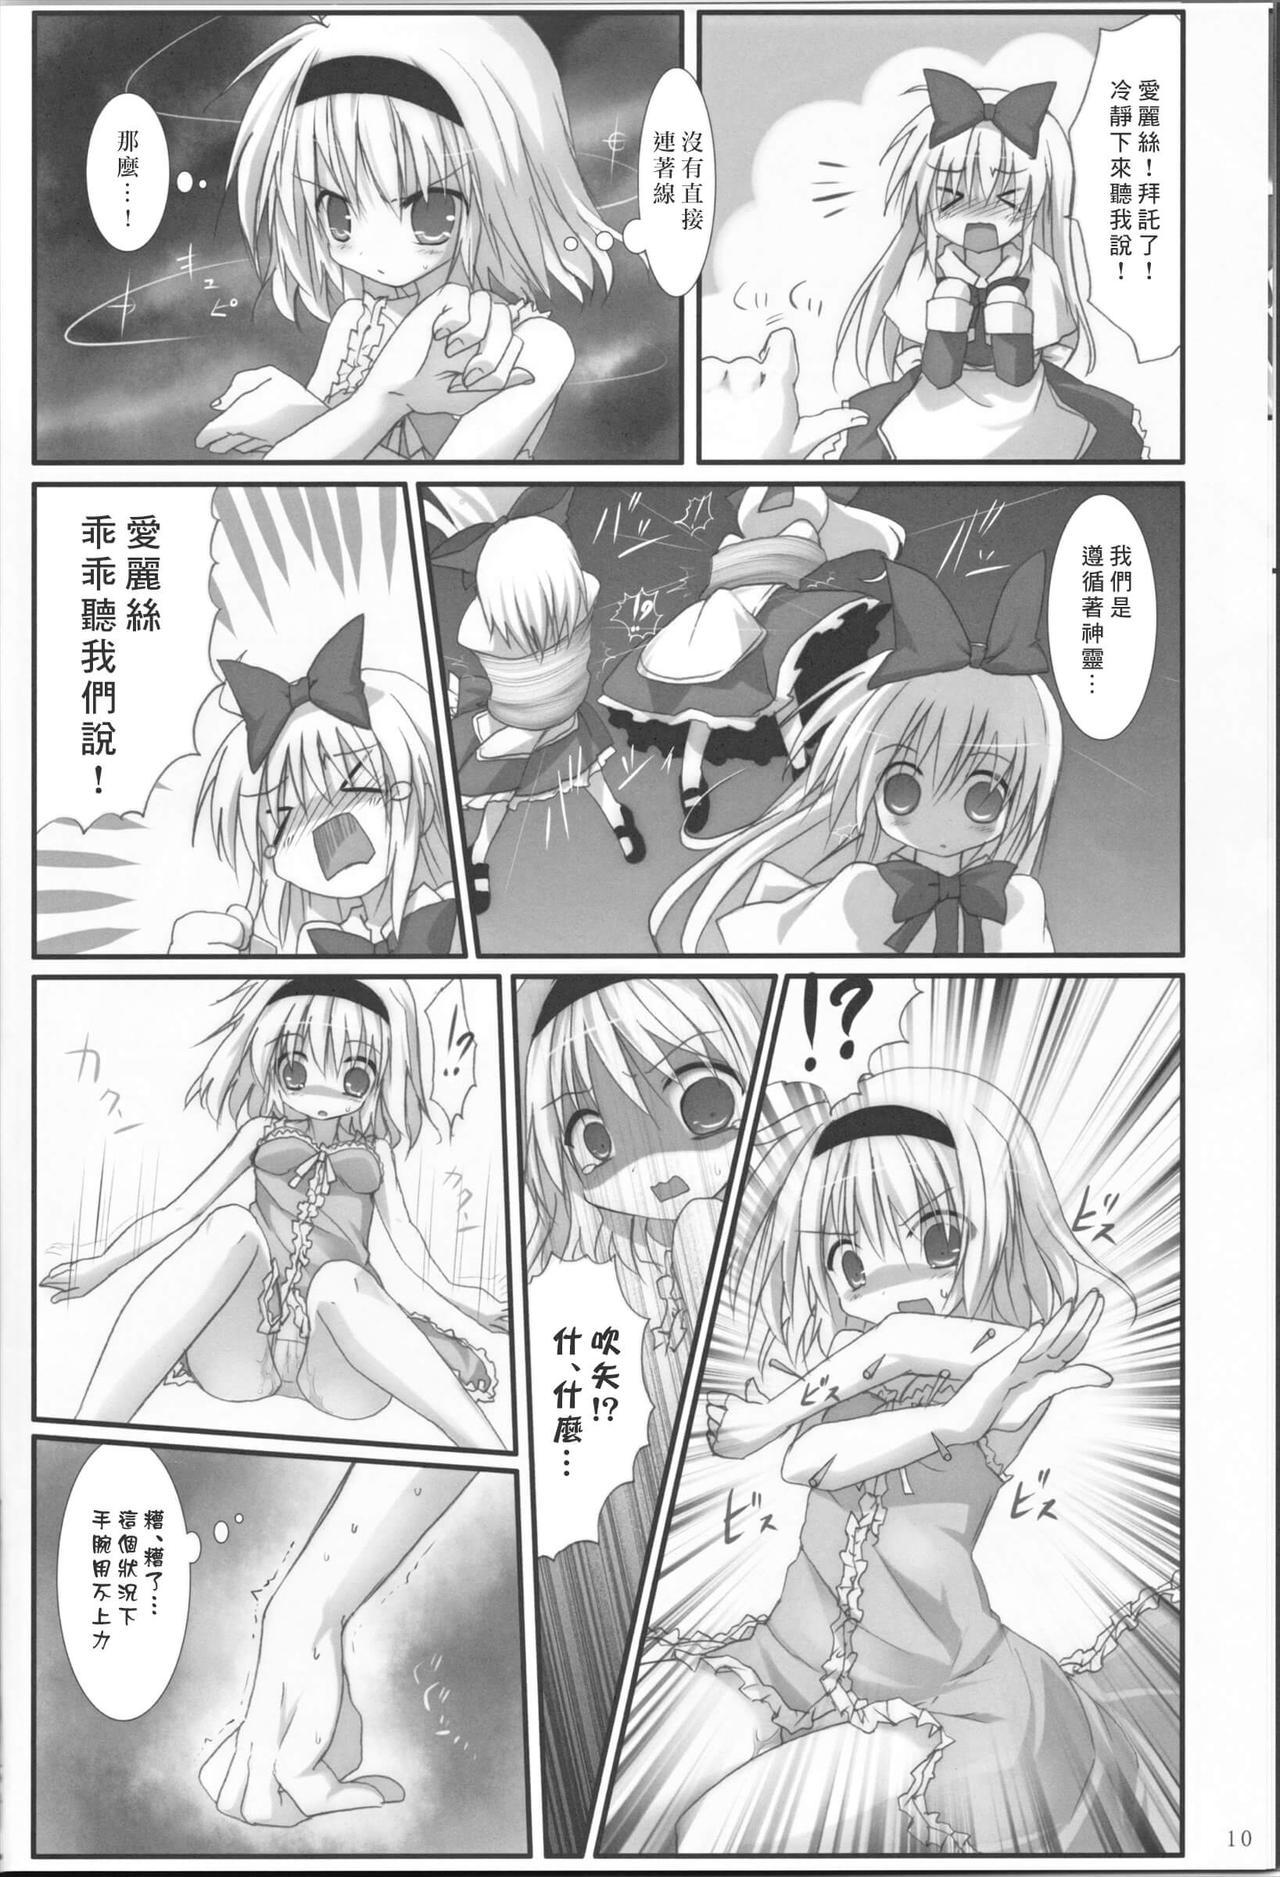 Collar Alice in Nightmare - Touhou project Corno - Page 11